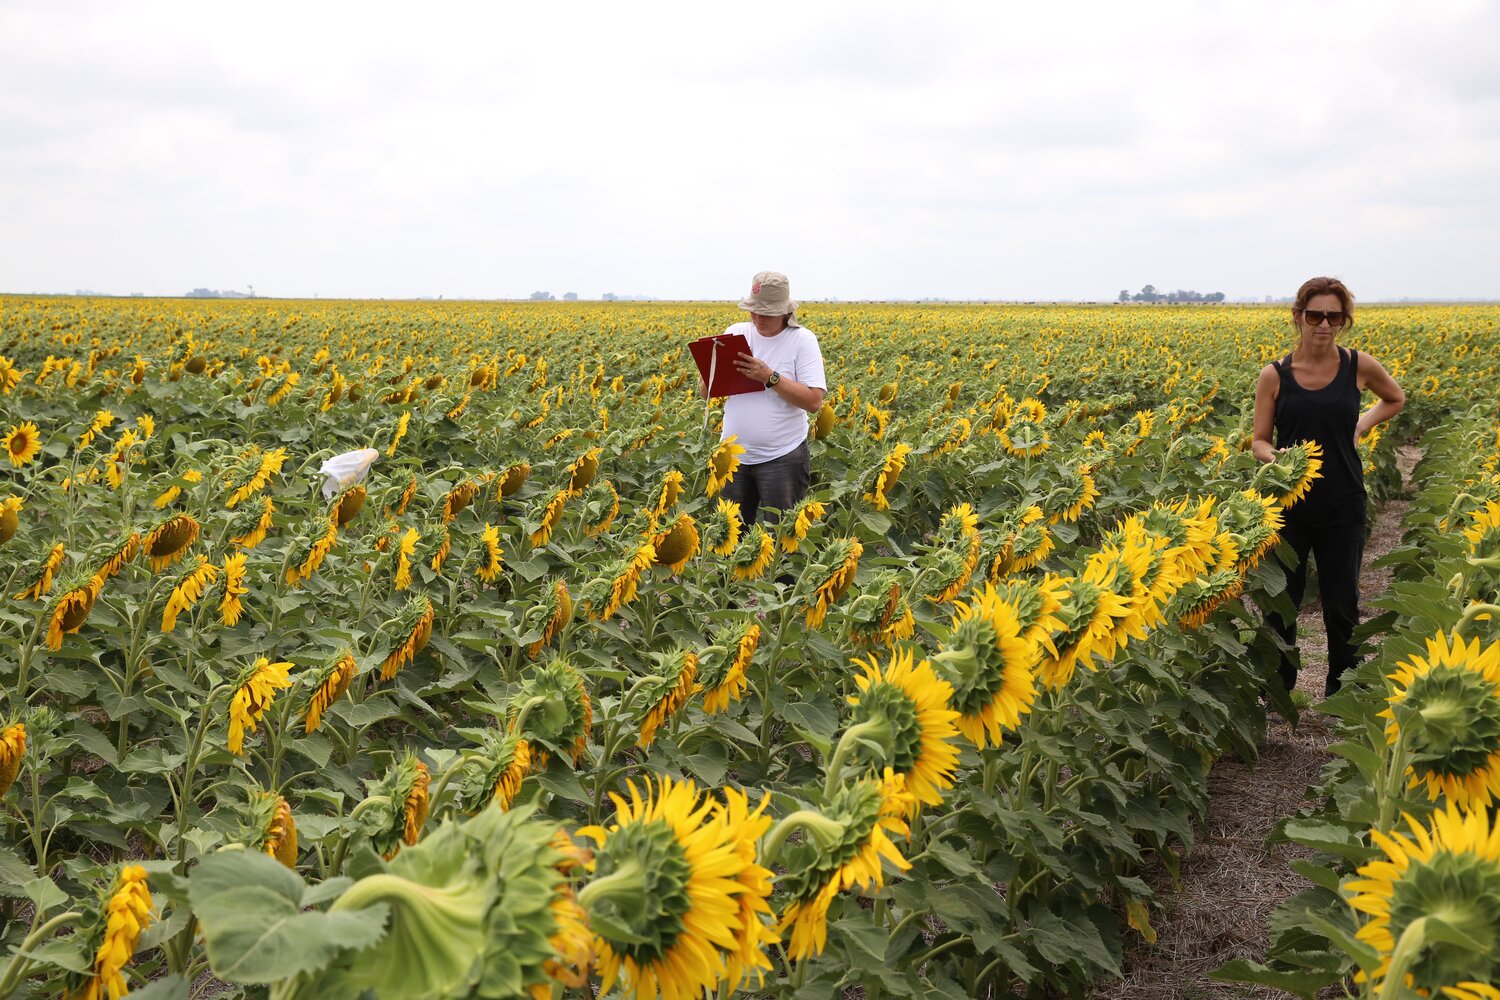 Across the Argentinian sunflower-producing regions, INTA, in collaboration with the Argentinian Sunflower Association (ASAGIR), carries out annual trials of the commercial hybrids that are sold in the local market. “The results of these trials help producers choose the best cultivars for their region,” says Carolina Troglia (left), the group leader for INTA Balcarce, who is pictured here with her colleague Carla Maringolo as they examine the trial hosted by the national seed company El Cencerro.